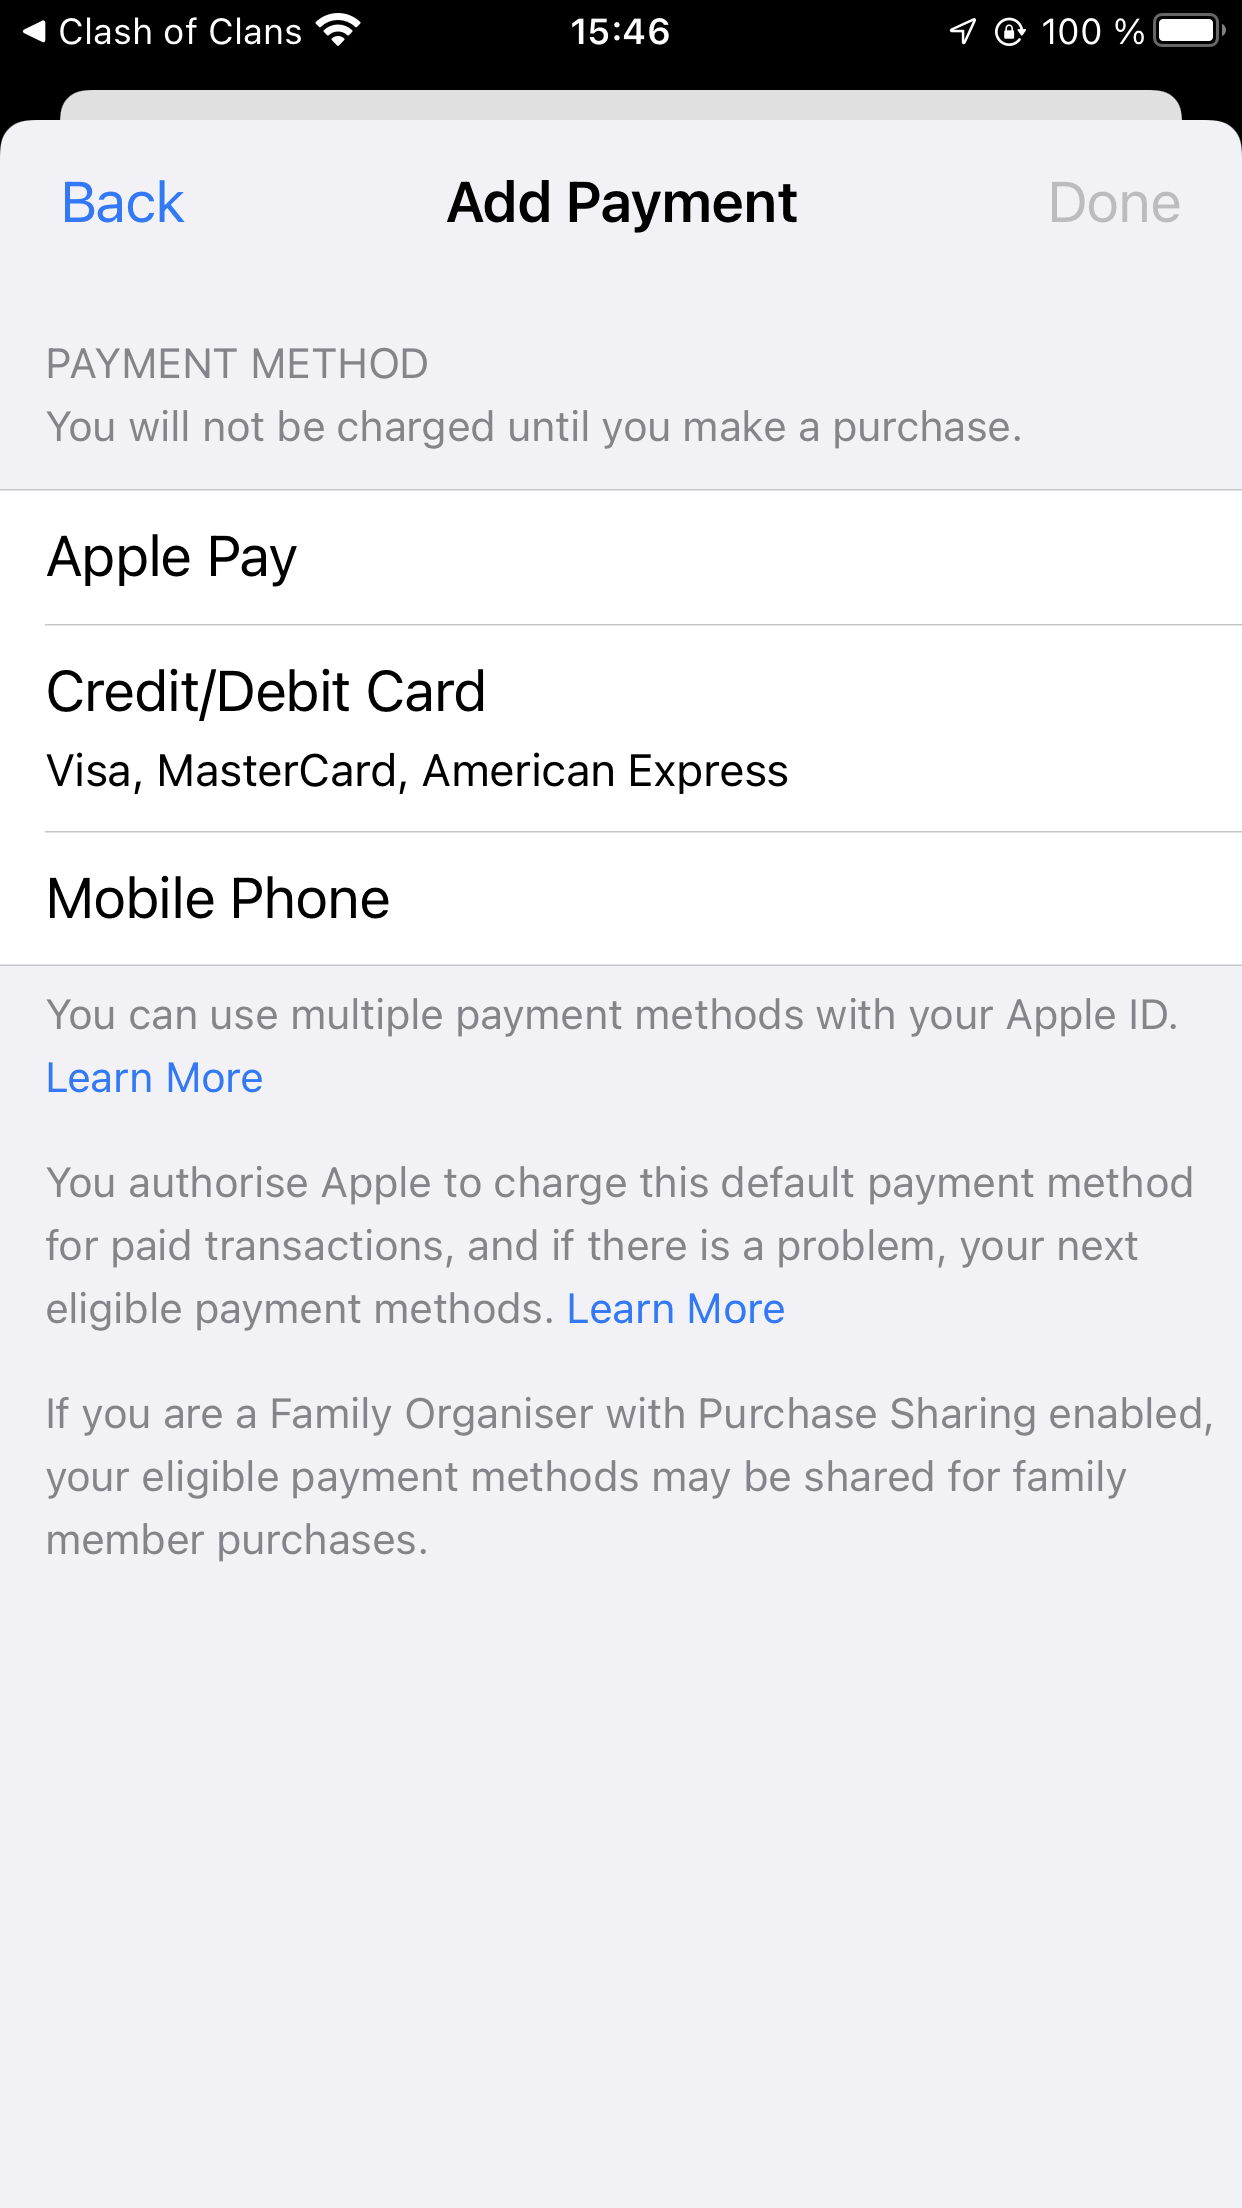 Apple Gift Card & Apple Account Balance - Tap Down Under